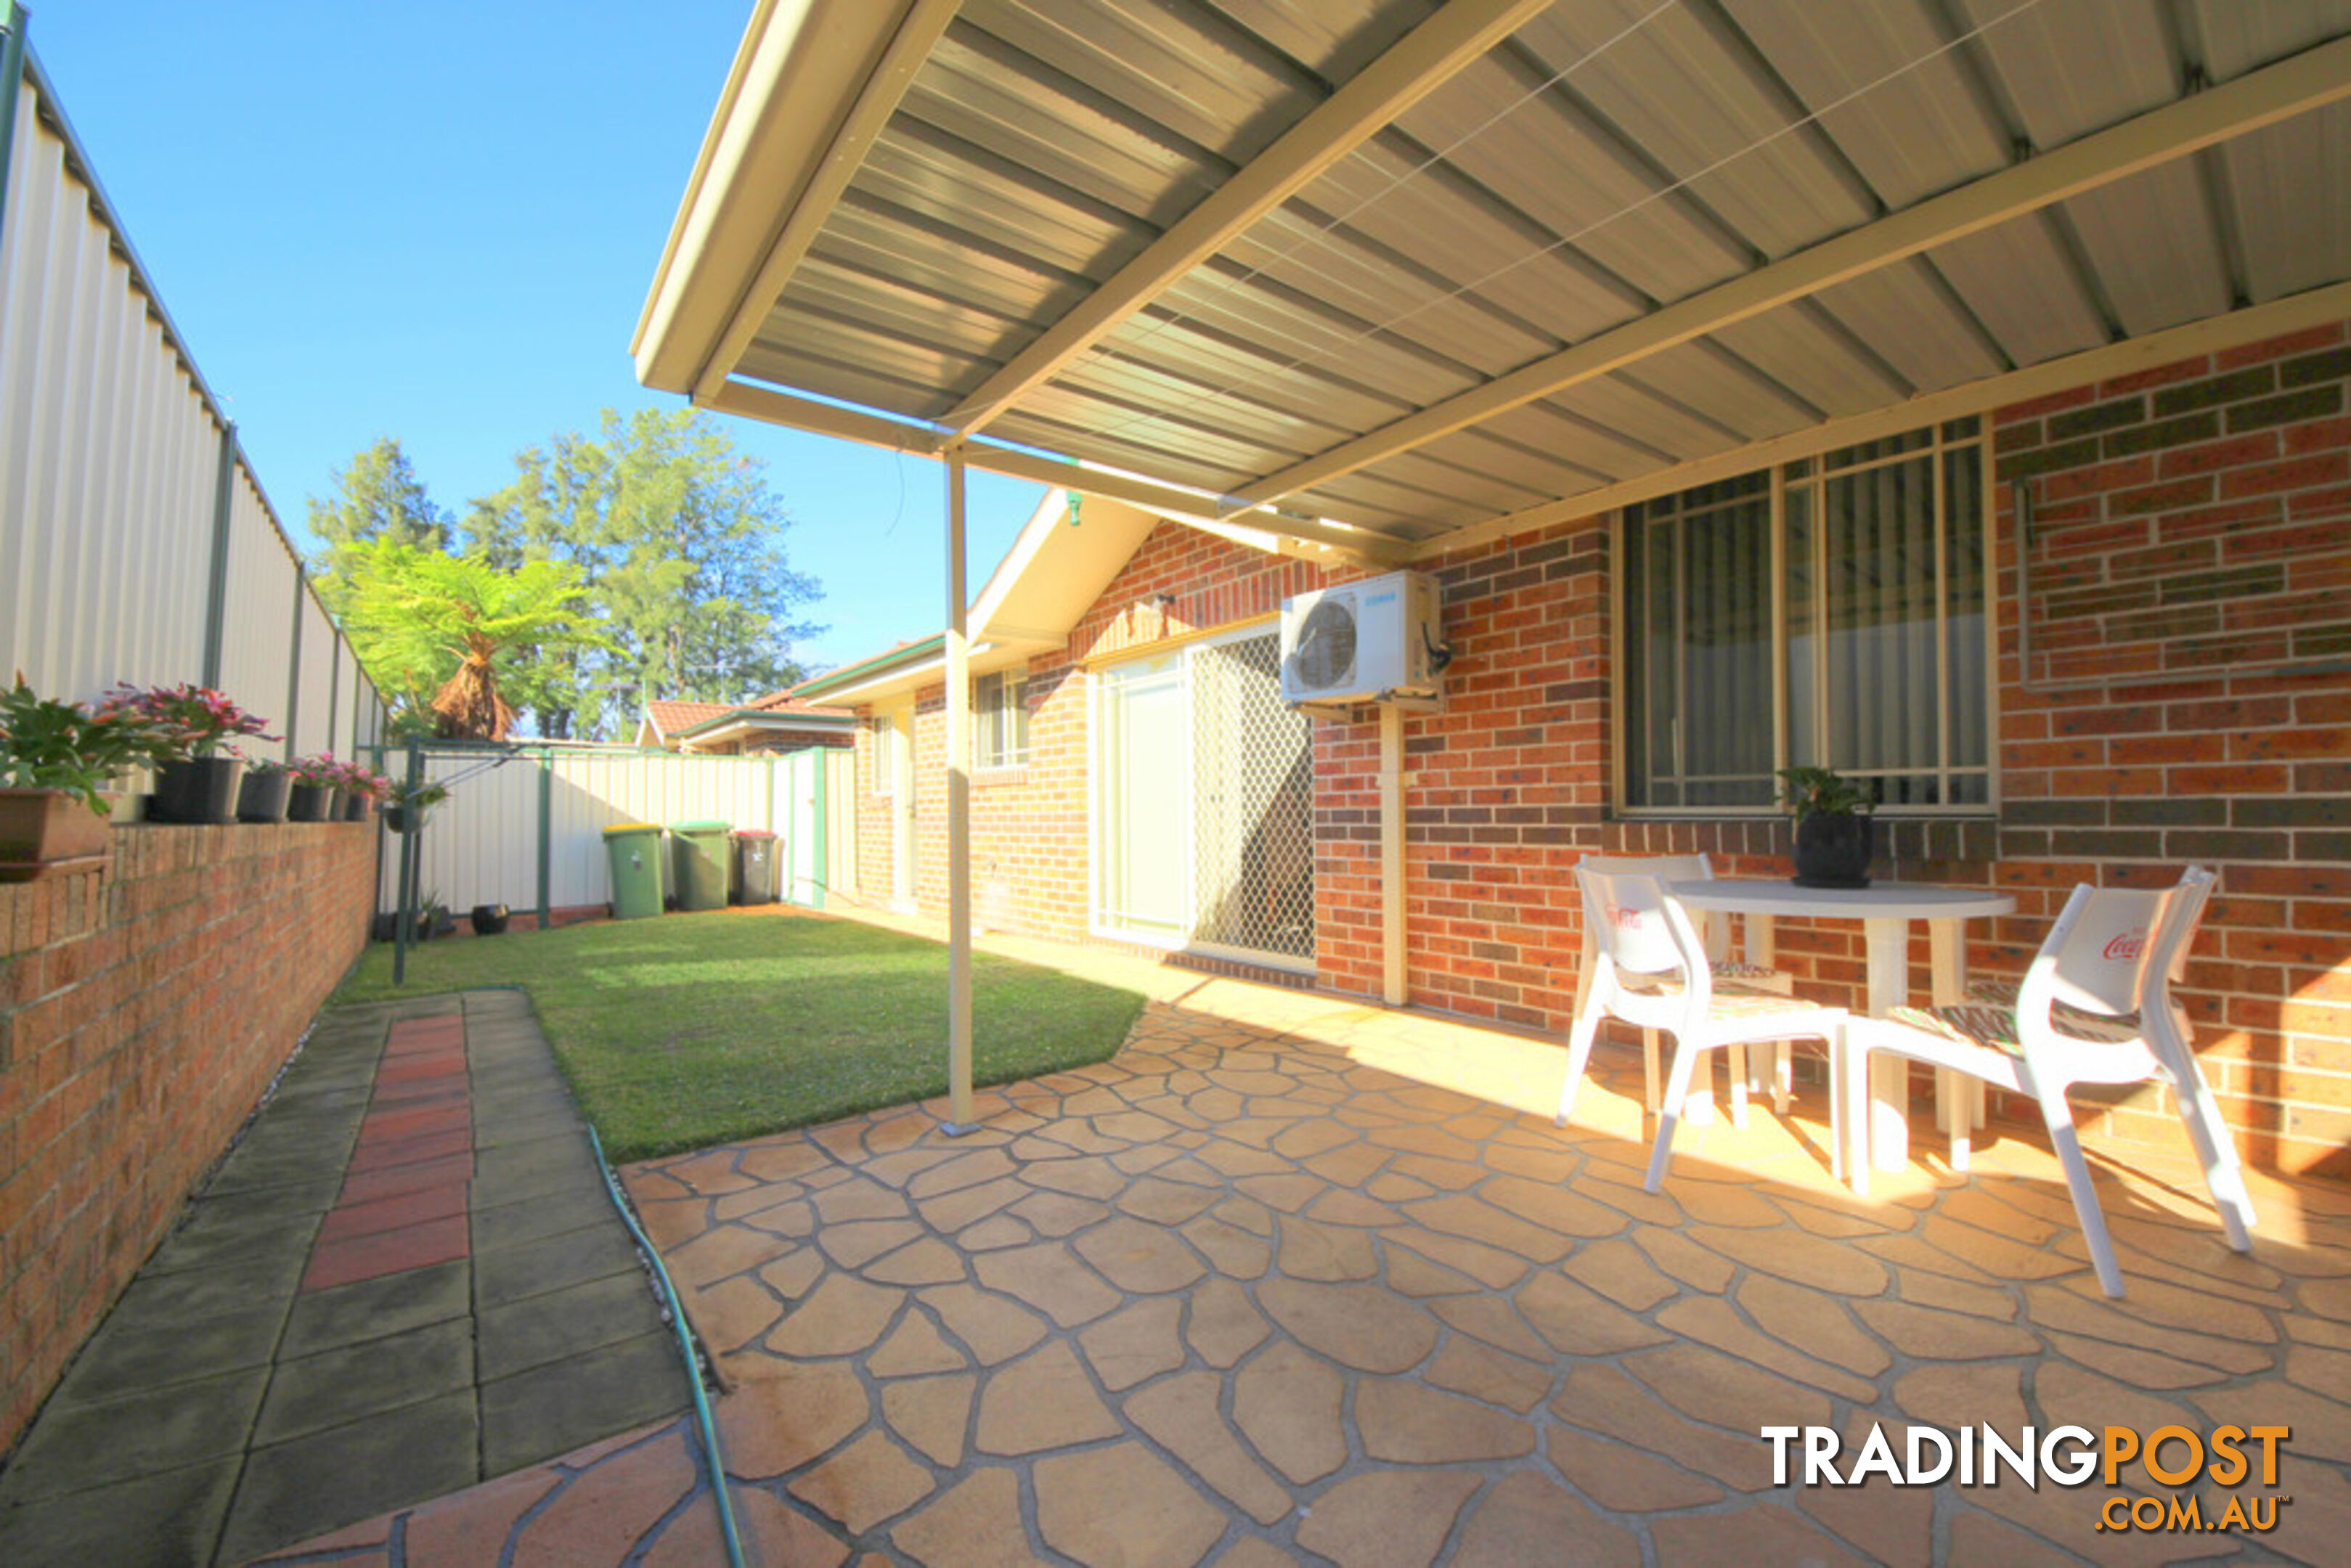 3/75 Taylor CONDELL PARK NSW 2200